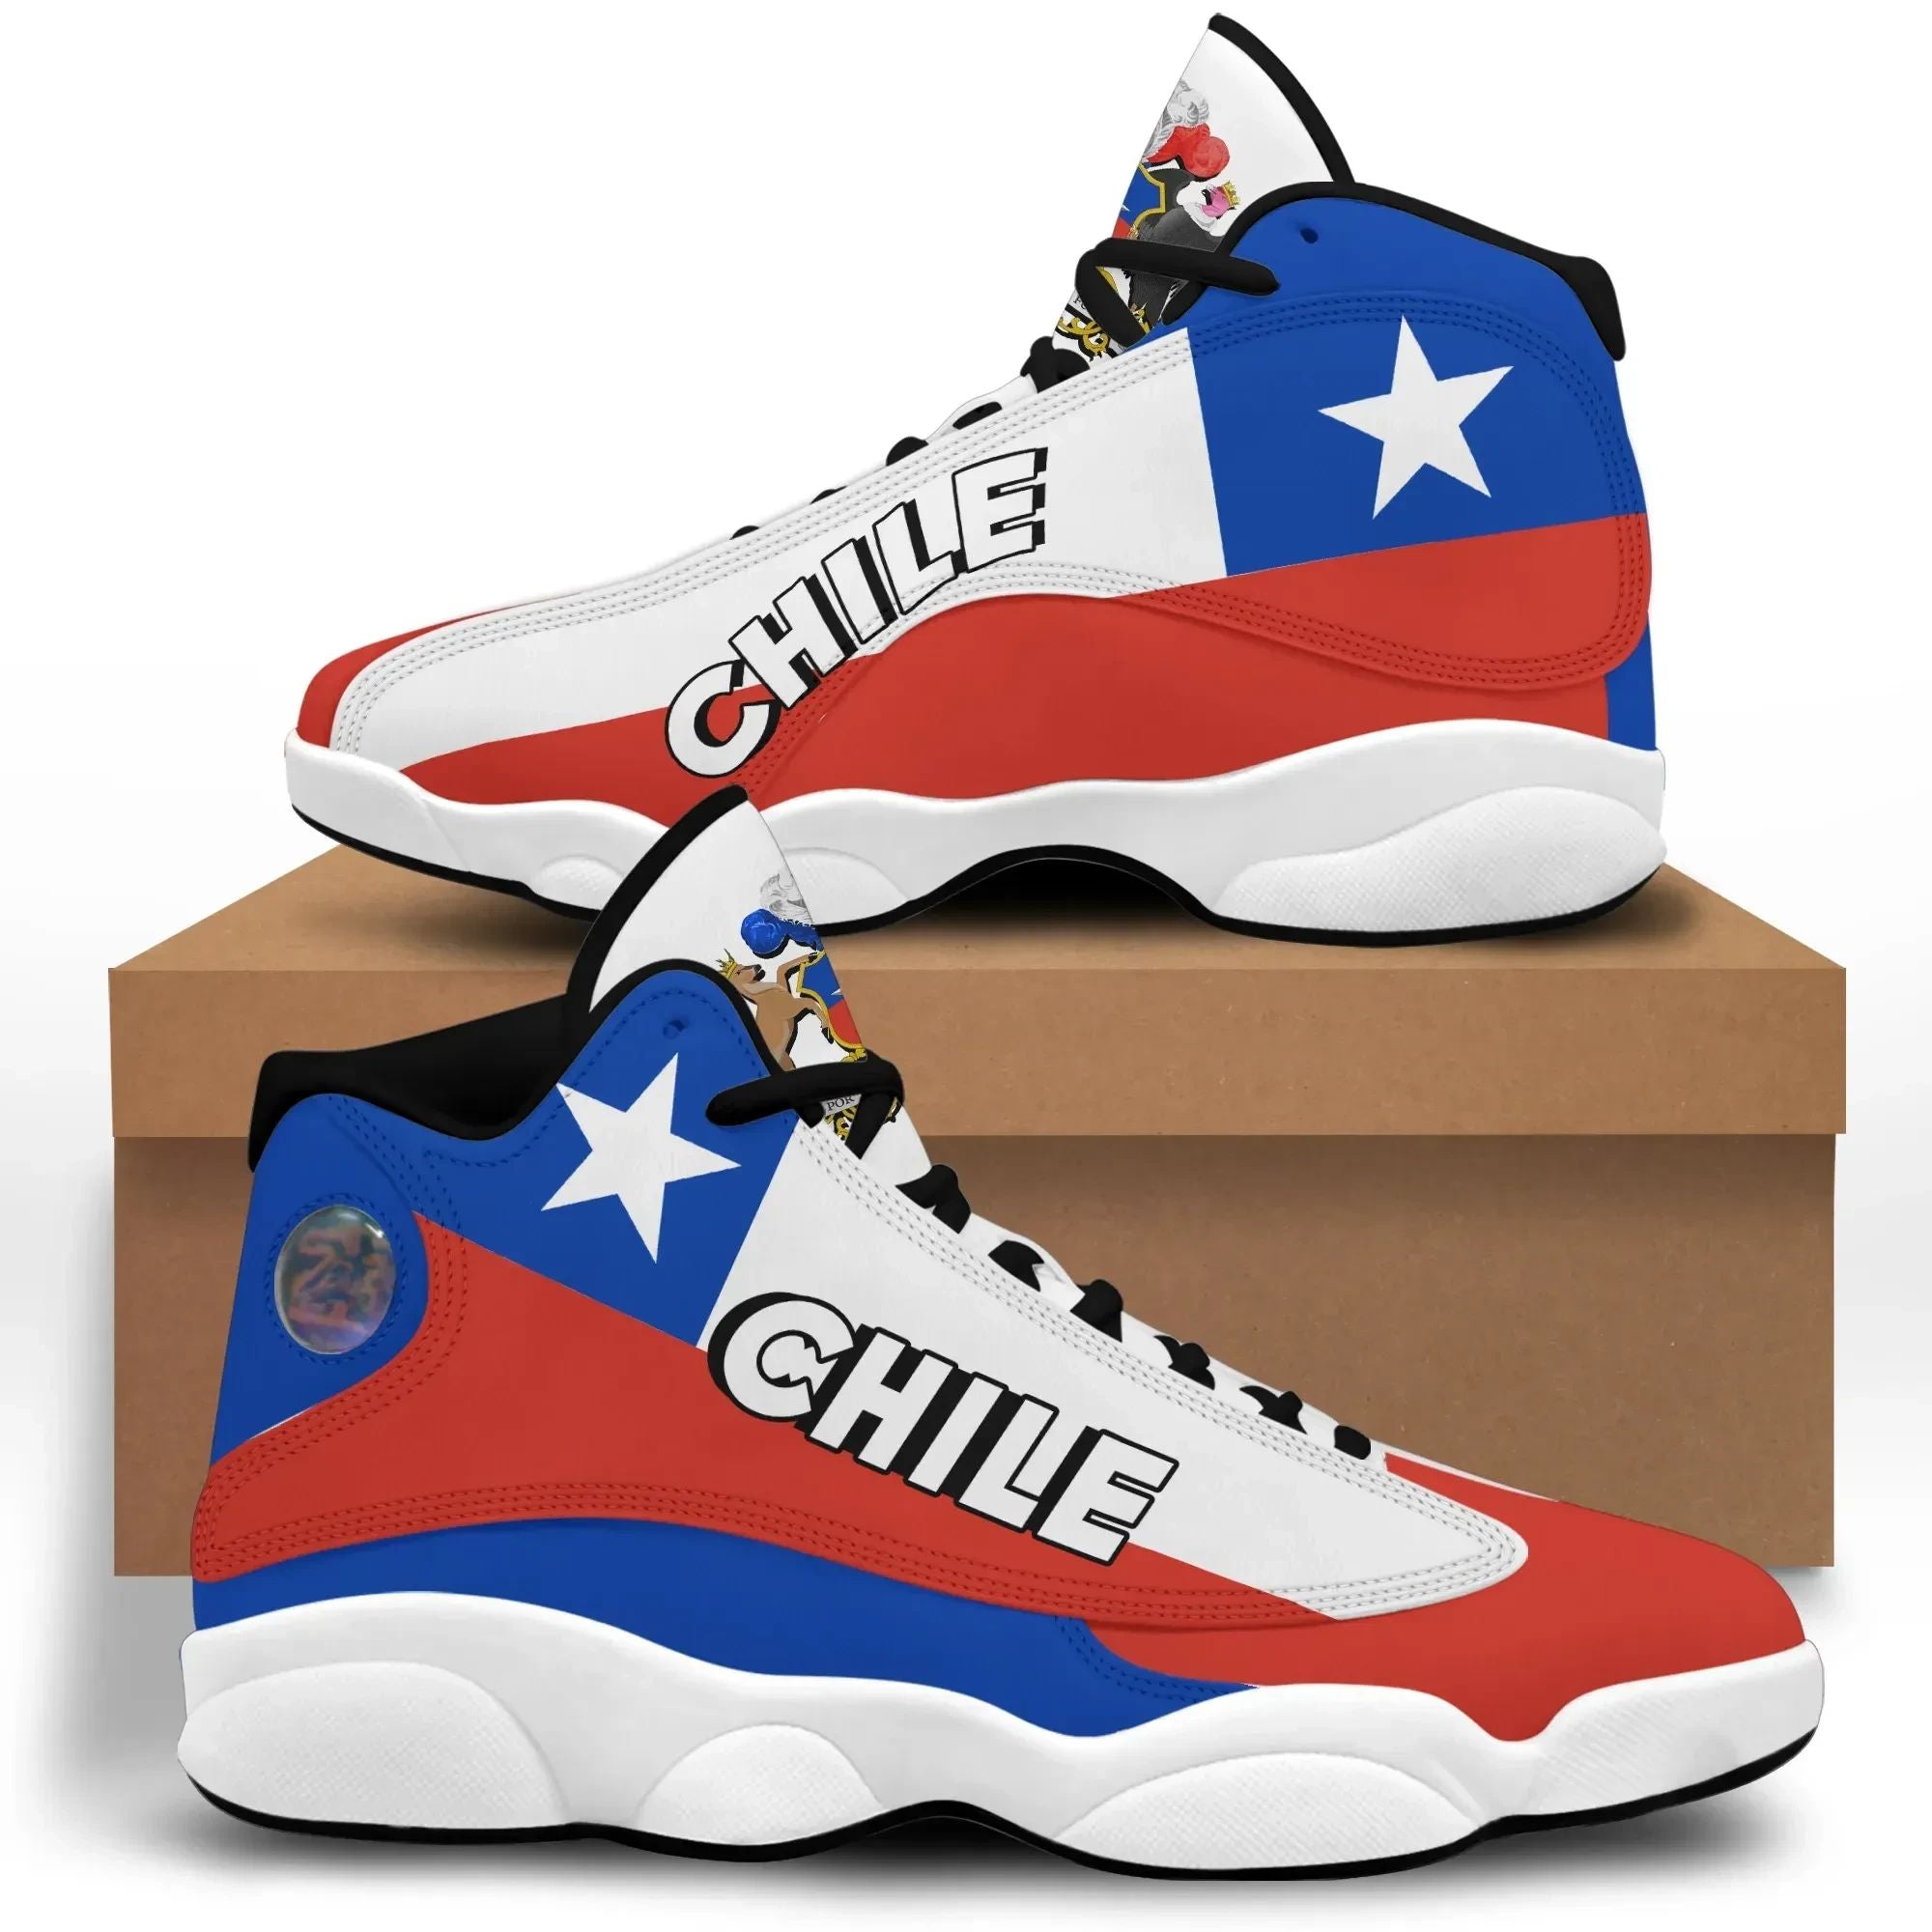 chile-high-top-sneakers-shoes-womensmens-special-flag